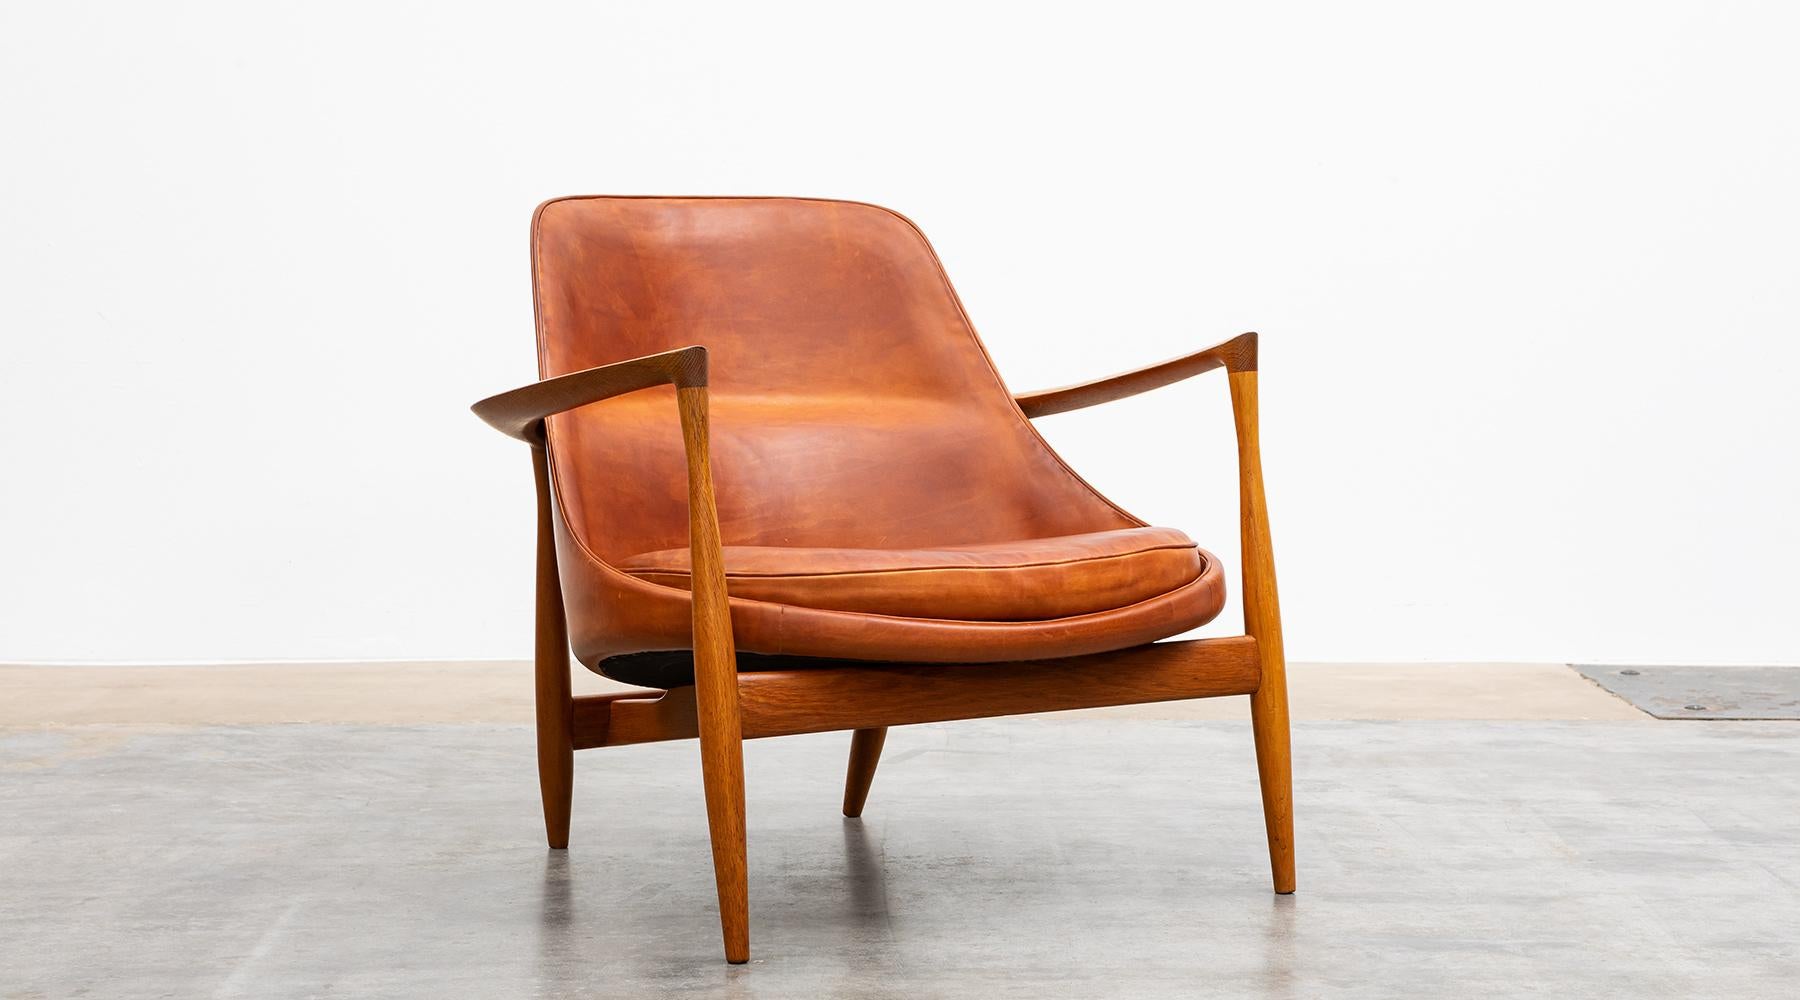 1950's Brown Wooden and Leather Lounge Chairs with Ottoman by Ib Kofod-Larsen For Sale 3